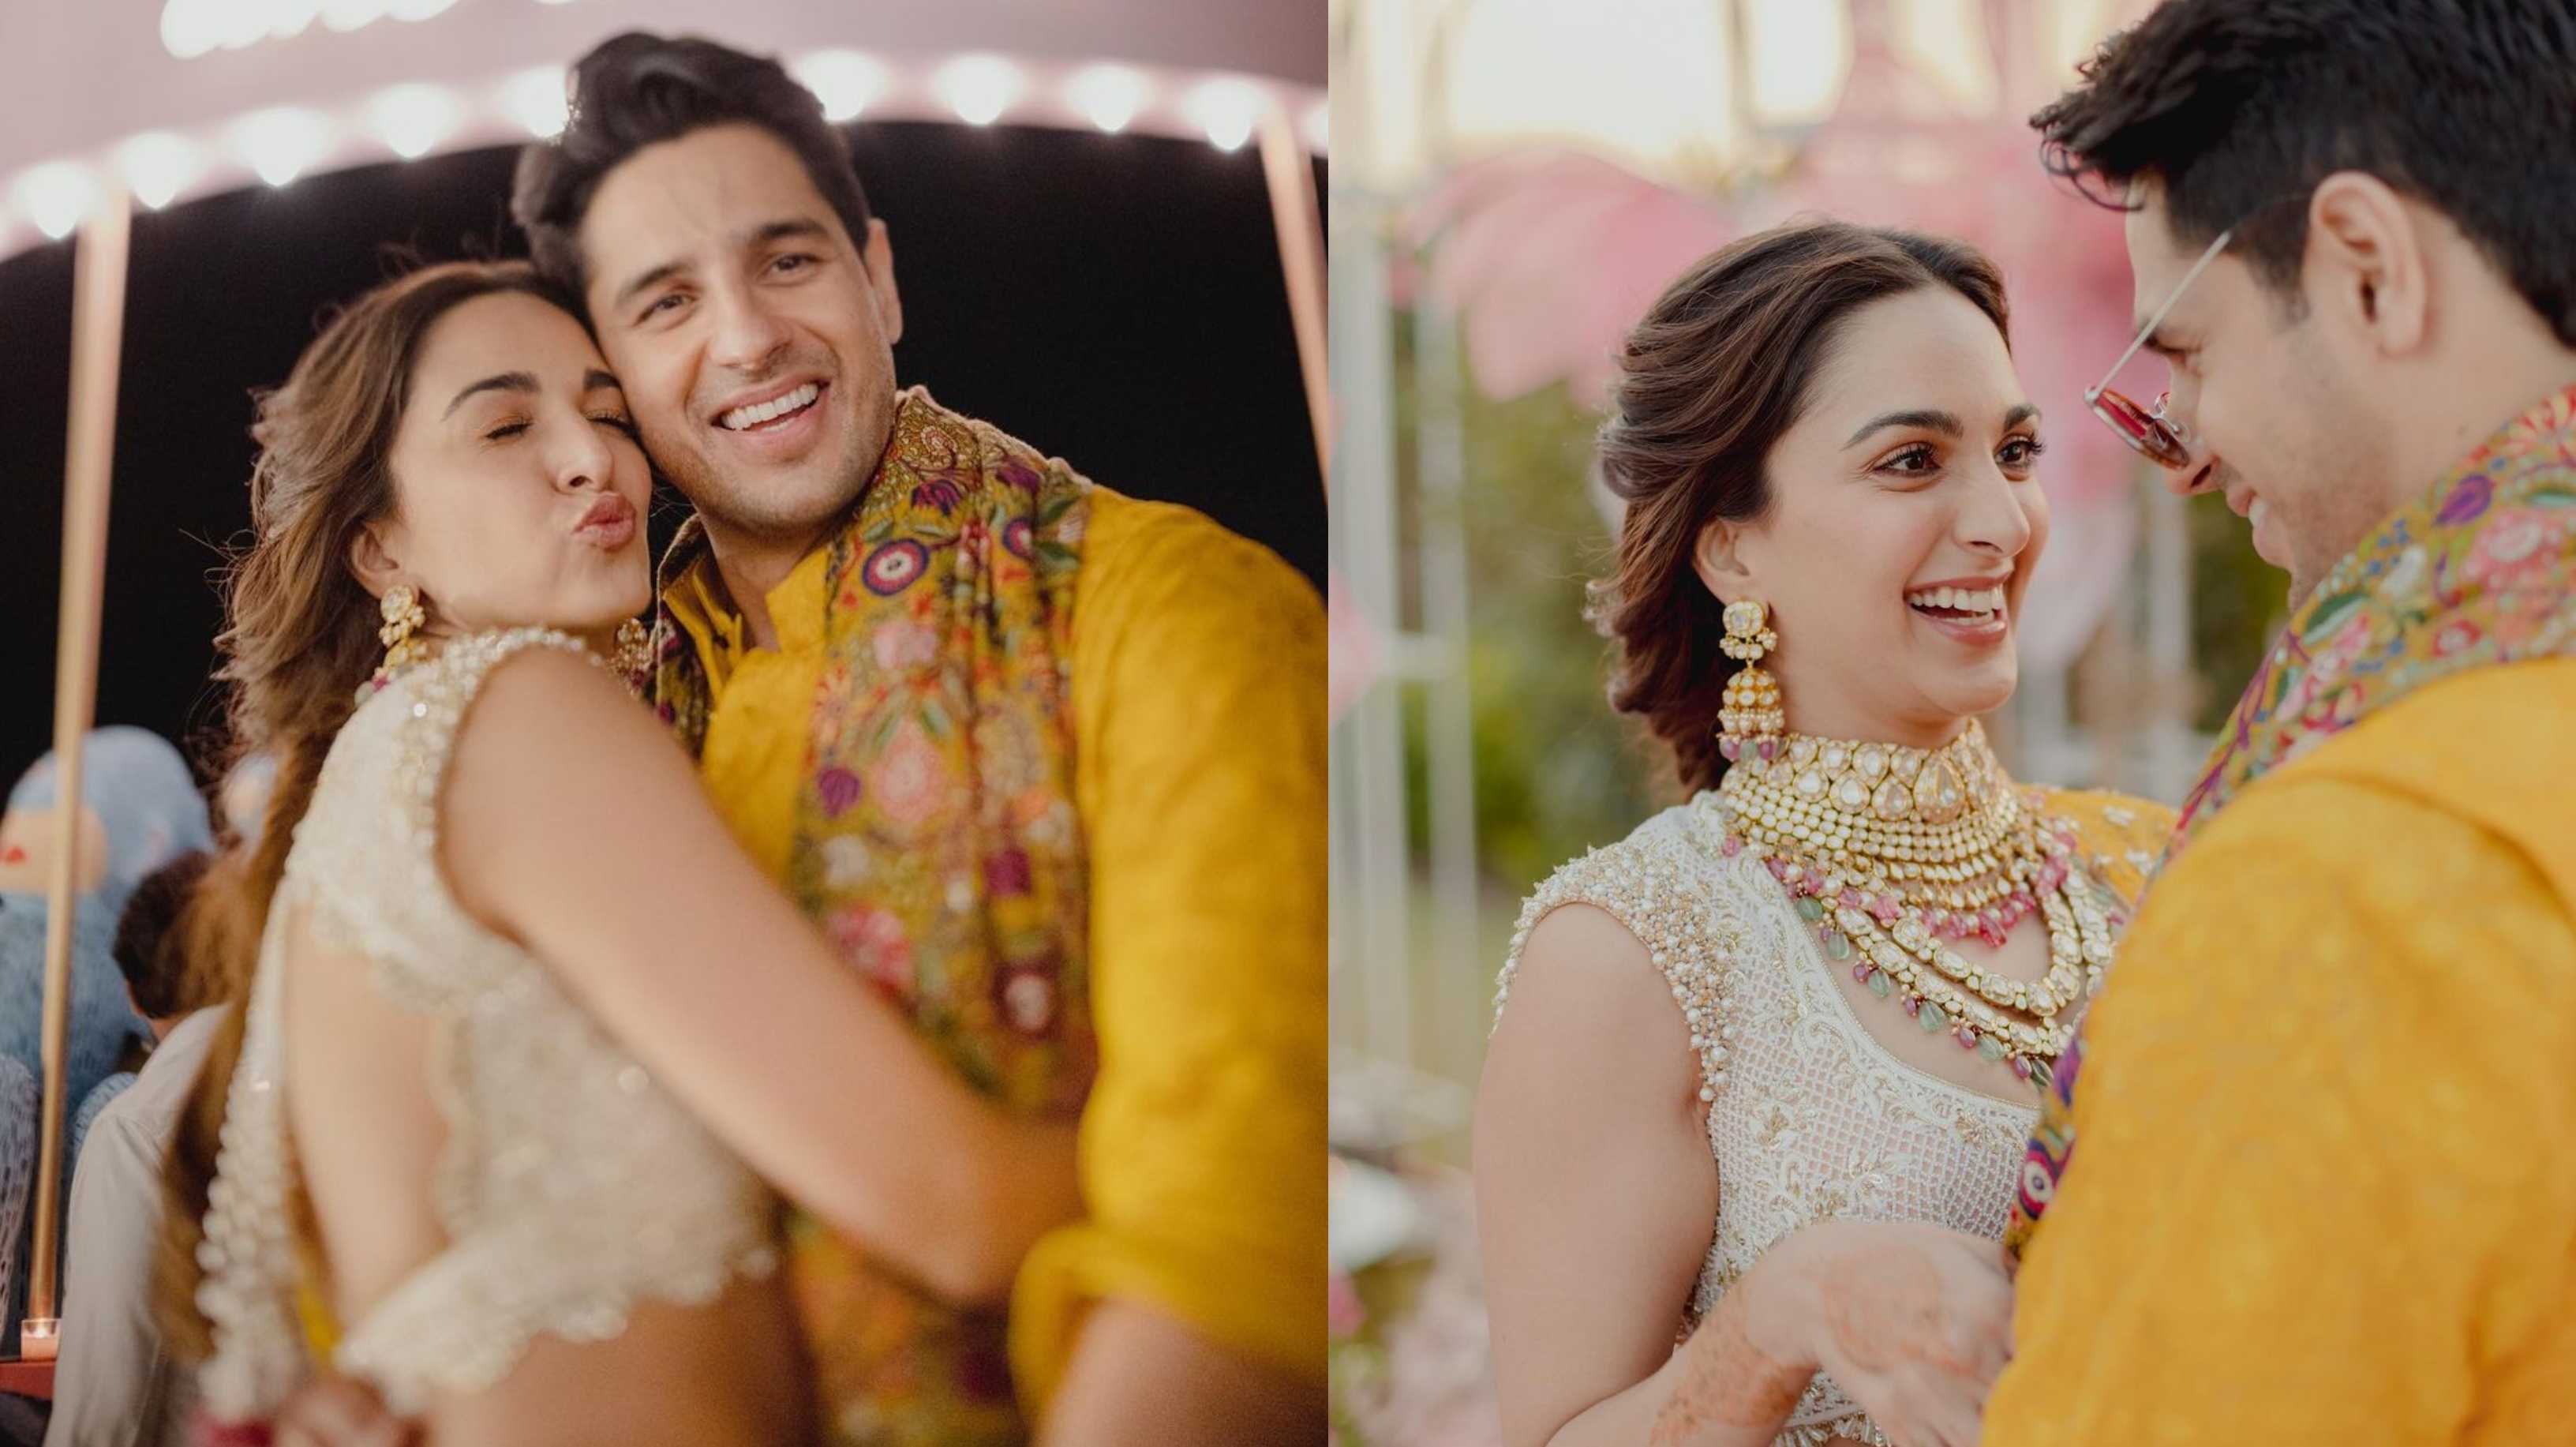 ‘Shershaah has given me love & a wife too’: Sidharth Malhotra gets candid about happily ever after with Kiara Advani